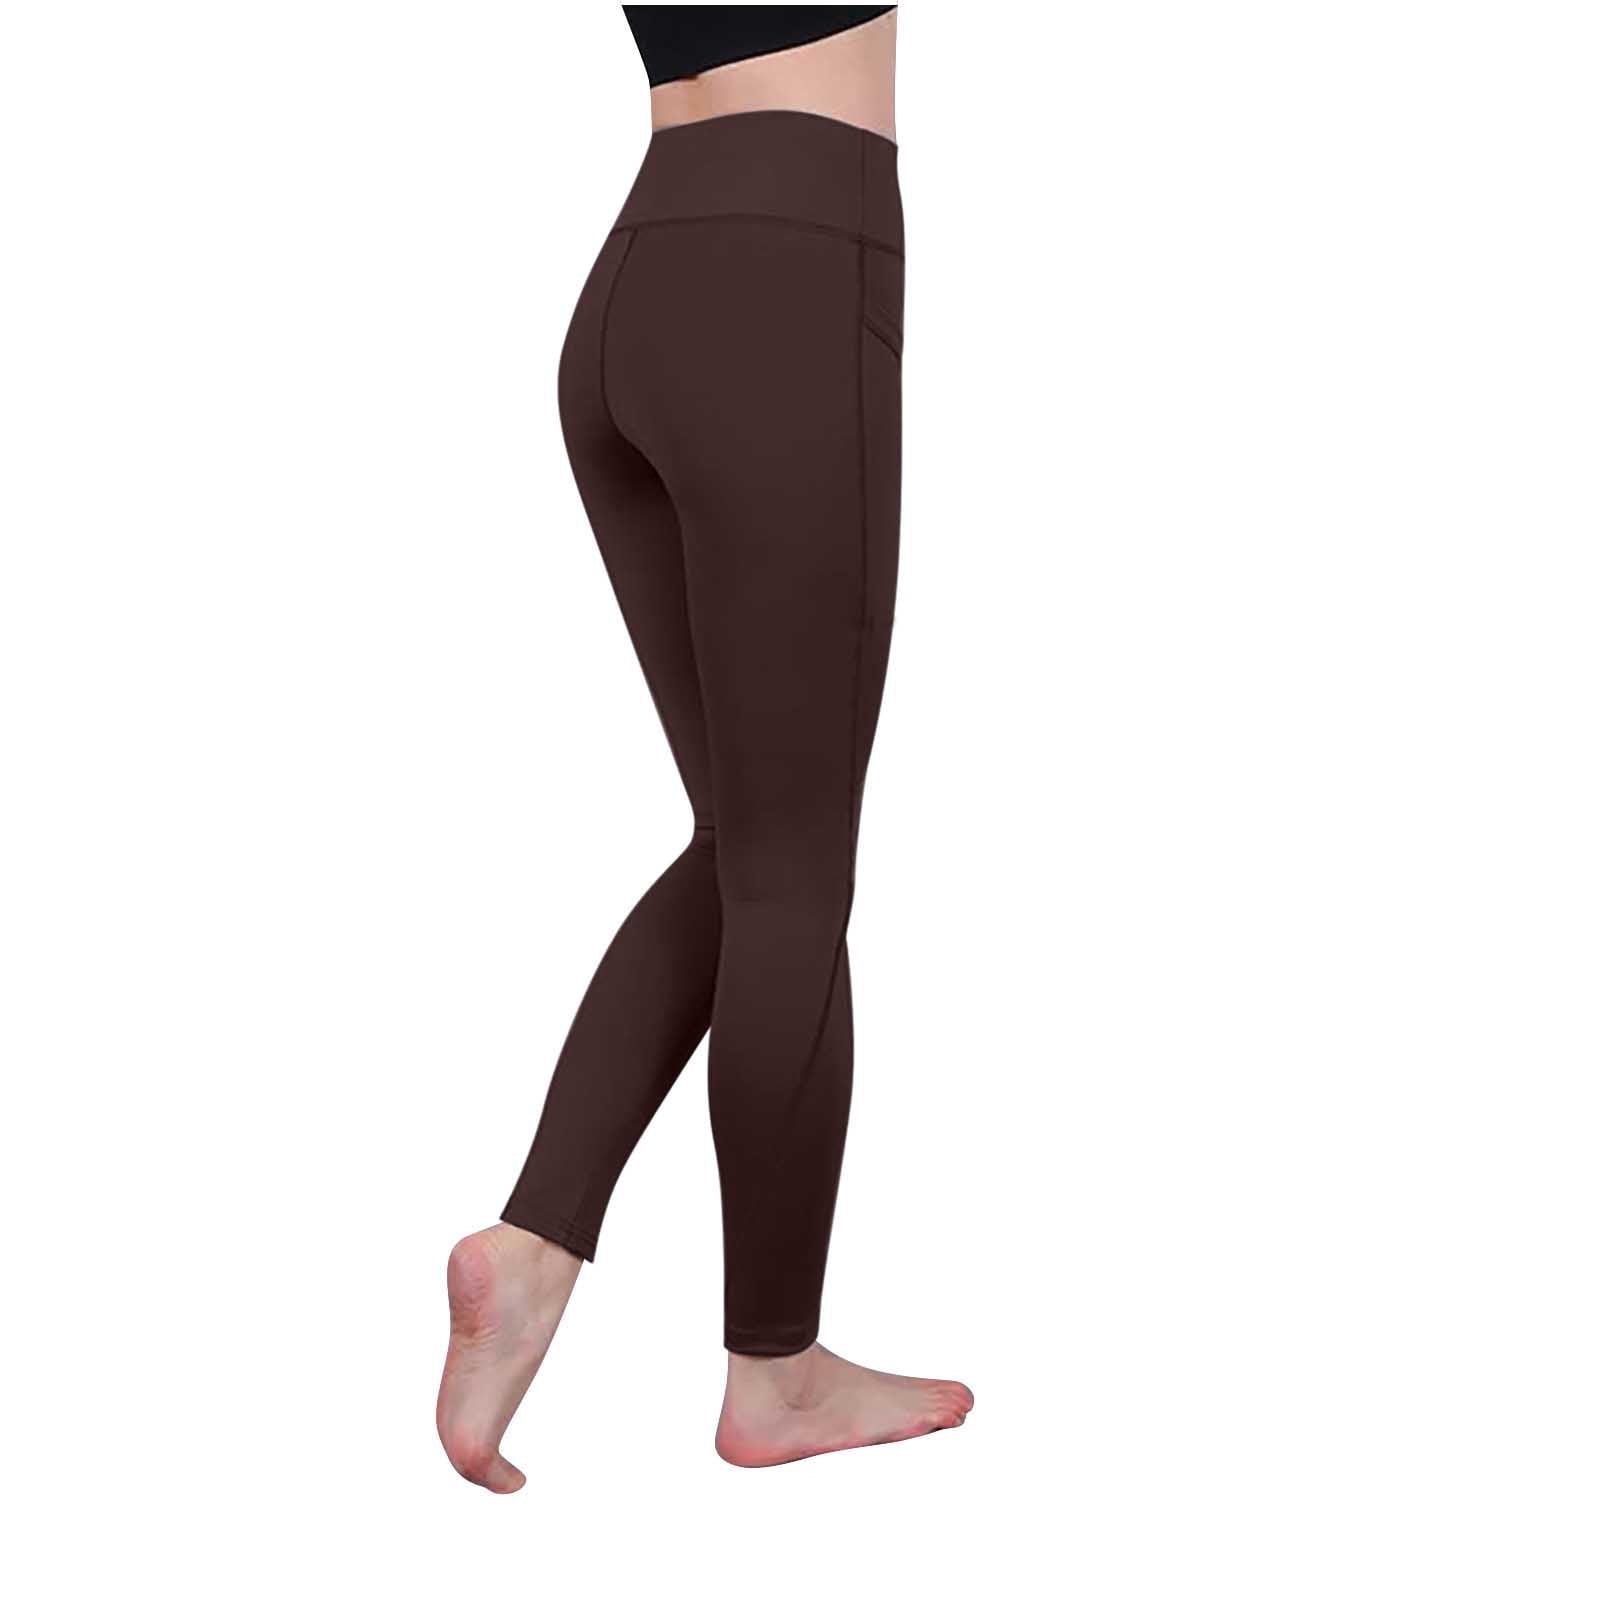 Buy CRZ YOGA Women's High Waisted Faux Leather Legging Stretchy Pants  Lightweight Workout Tights -28 Inches Black Small at